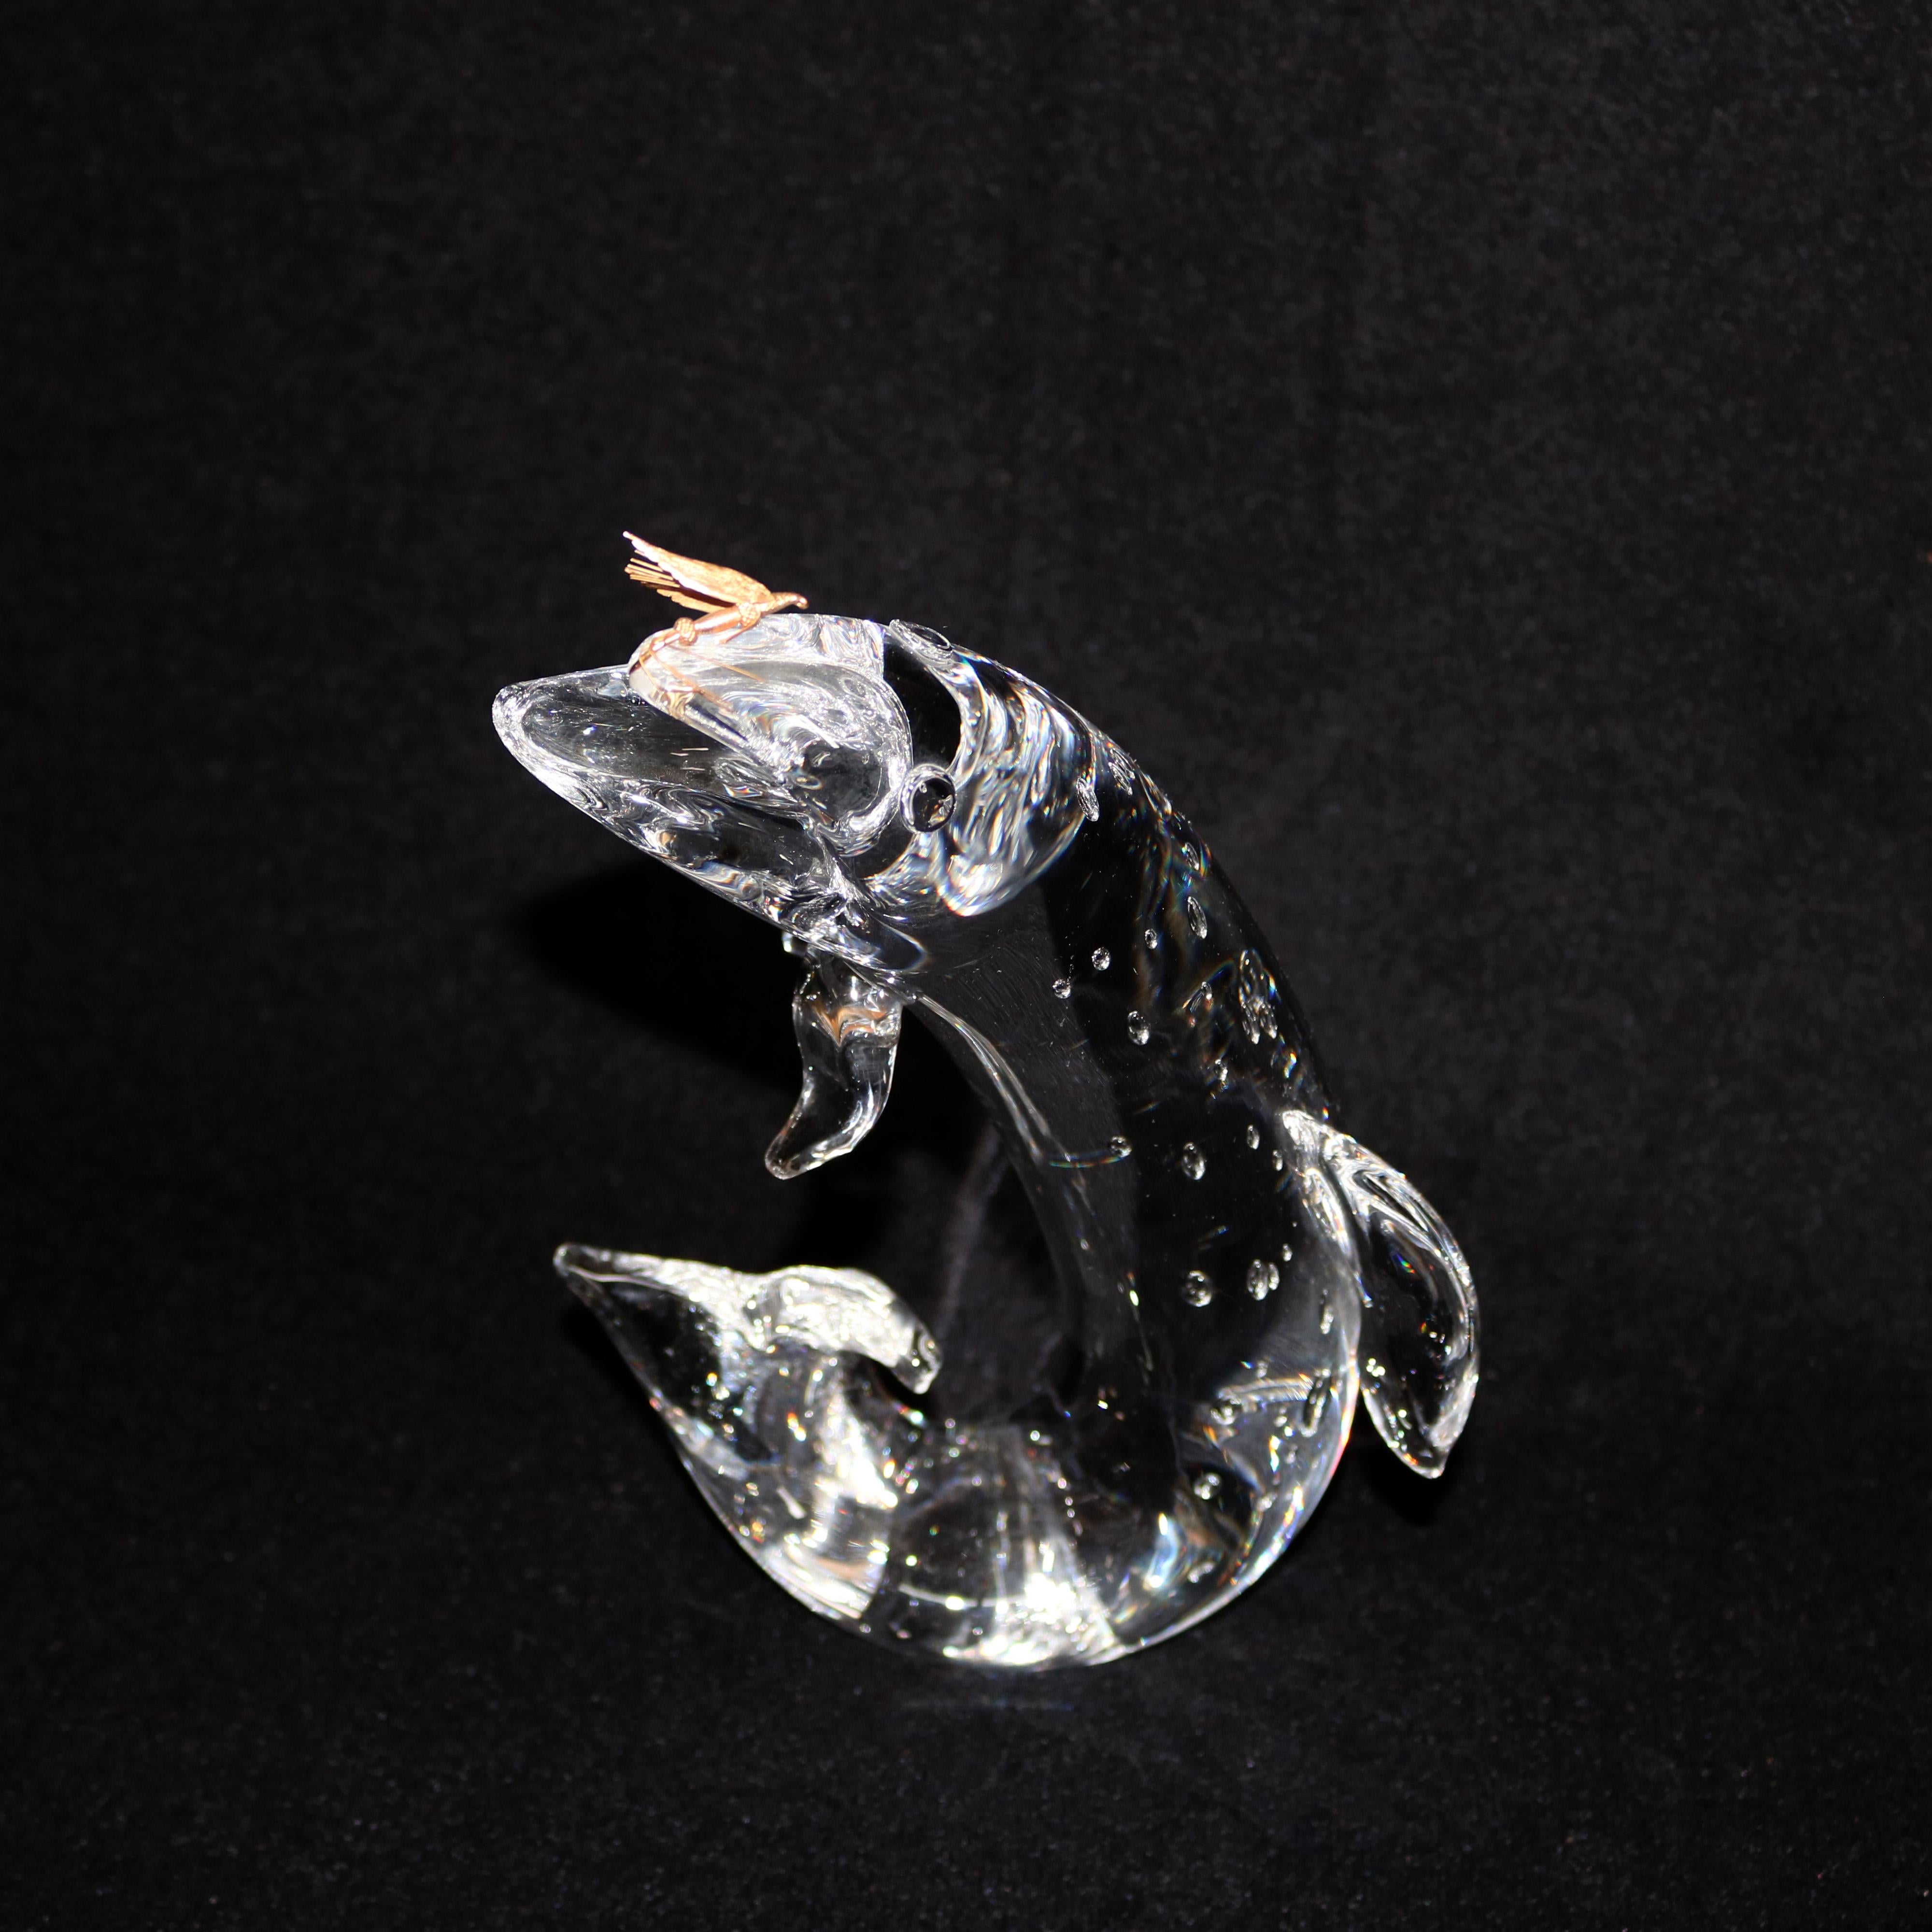 Hand-Crafted Steuben Figurative Crystal and Gold Sculpture Paperweight, Trout & Fly, Signed